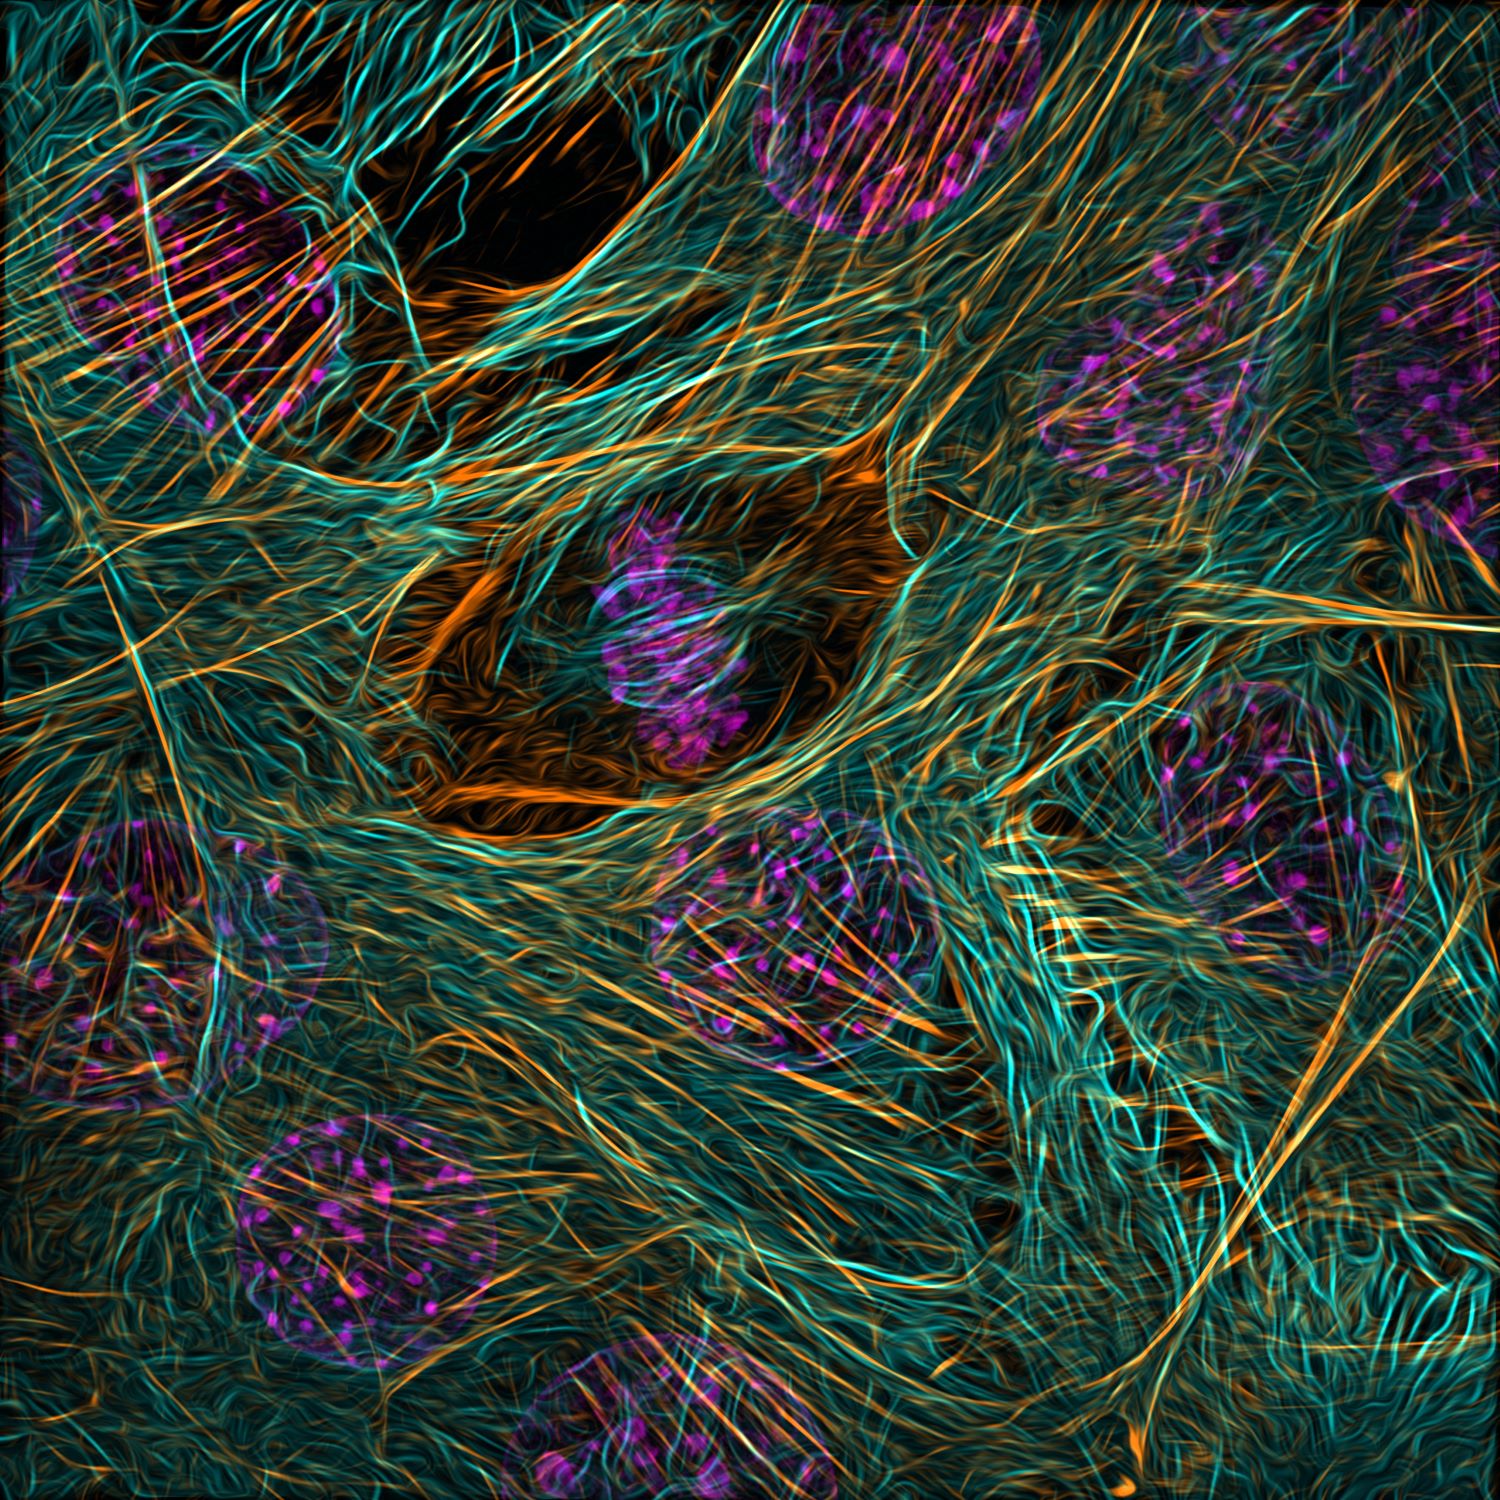 9th place. Cytoskeleton of a dividing myoblast highlighting the cellular components tubulin (cyan), F-actin (orange) and nucleus (magenta), magnified 63x.